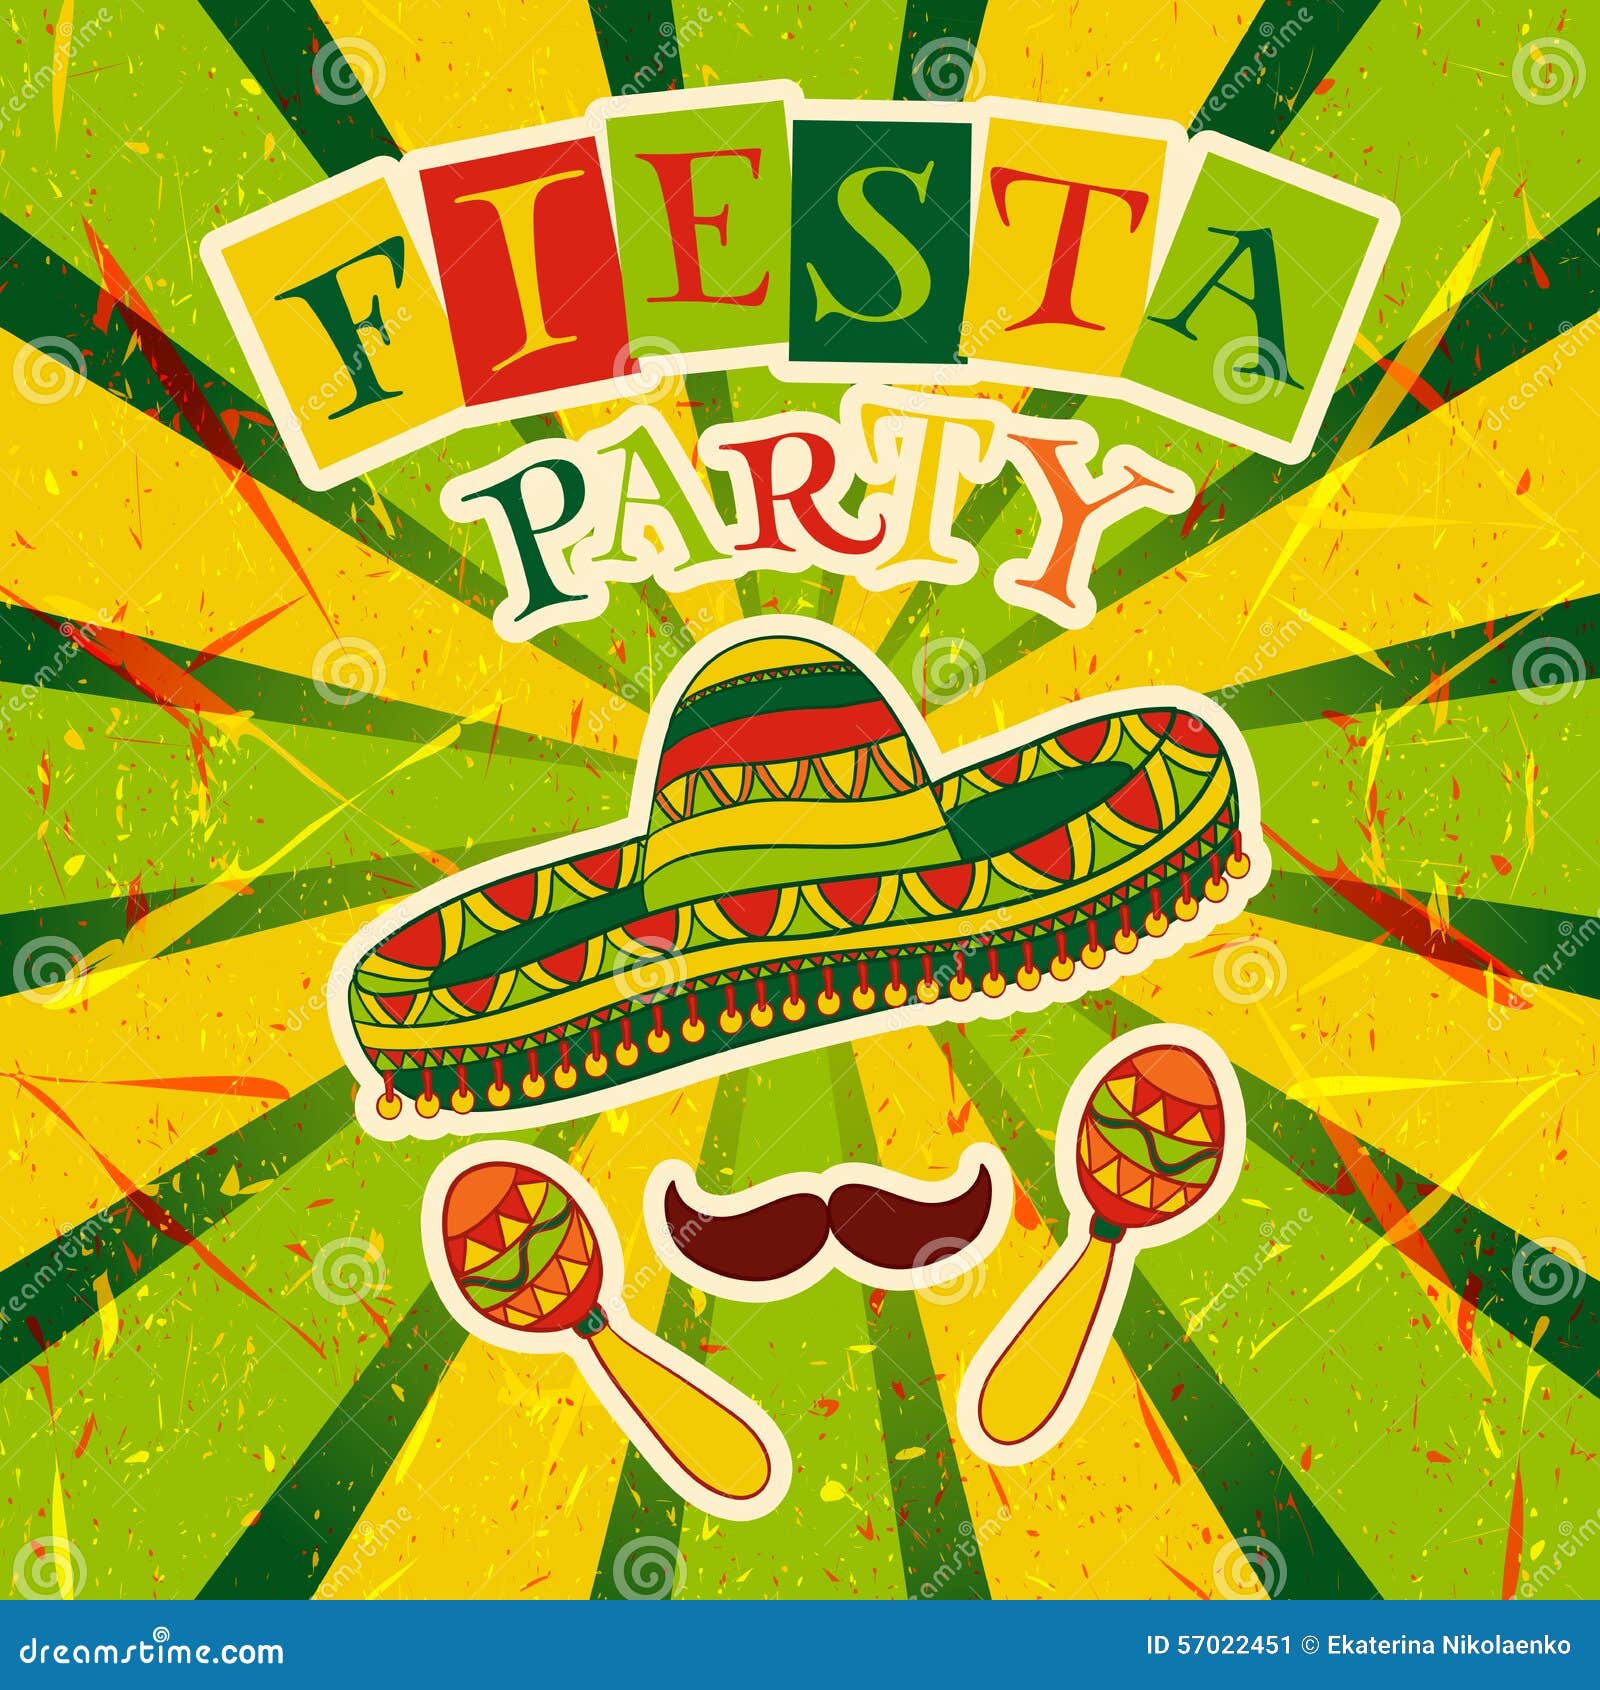 mexican fiesta party invitation with maracas, sombrero and mustache. hand drawn   poster